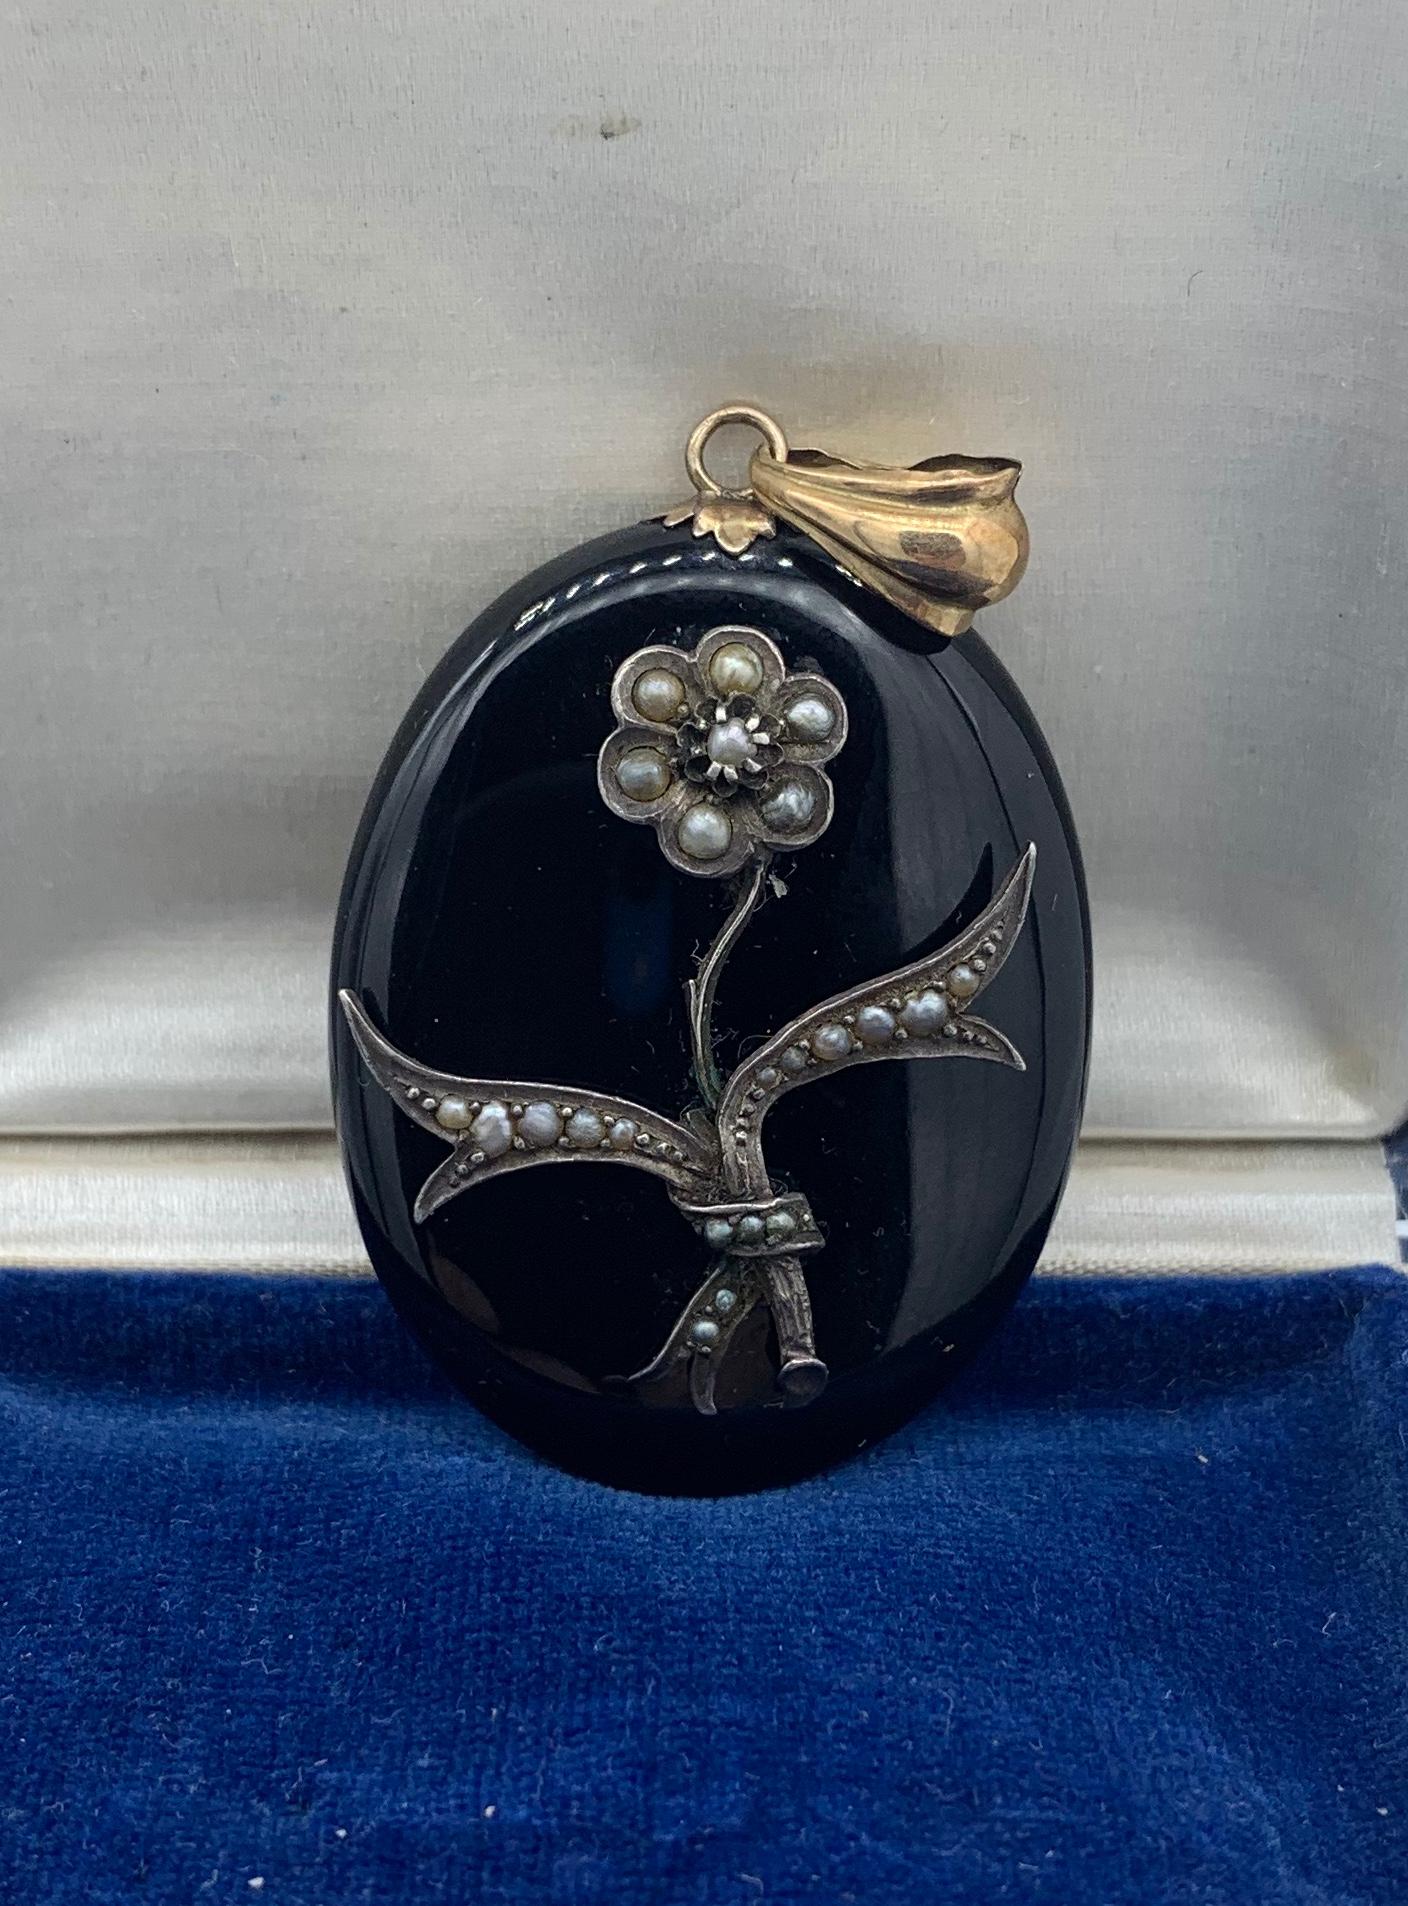 A magnificent Victorian - Belle Epoque Picture locket pendant necklace in Black Onyx, and Gold and Silver with Pearl adornments in a Flower Motif design.  This is one of the most stunning Victorian lockets we have seen.  The locket is an oval locket